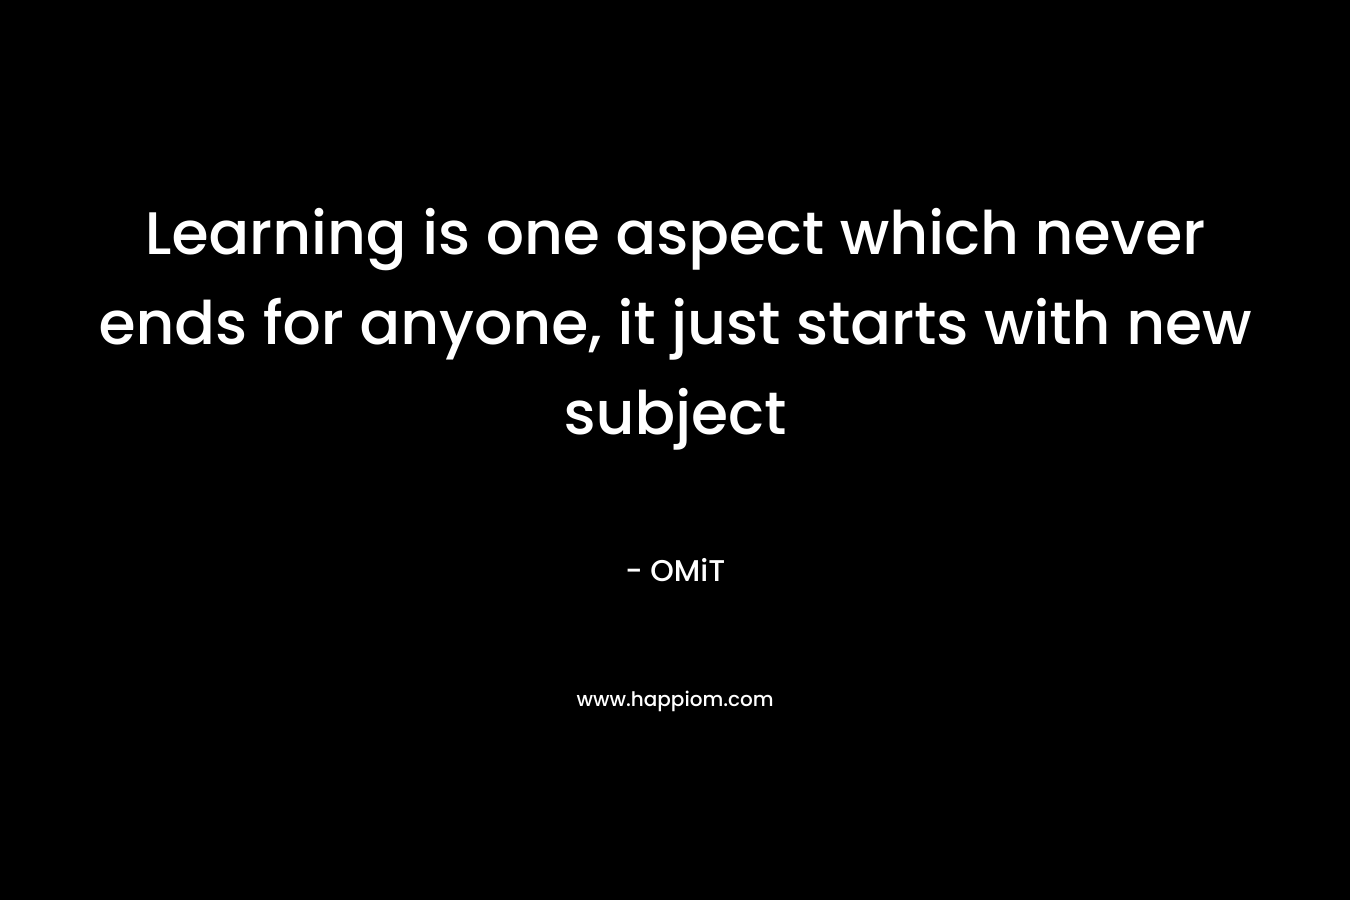 Learning is one aspect which never ends for anyone, it just starts with new subject – OMiT